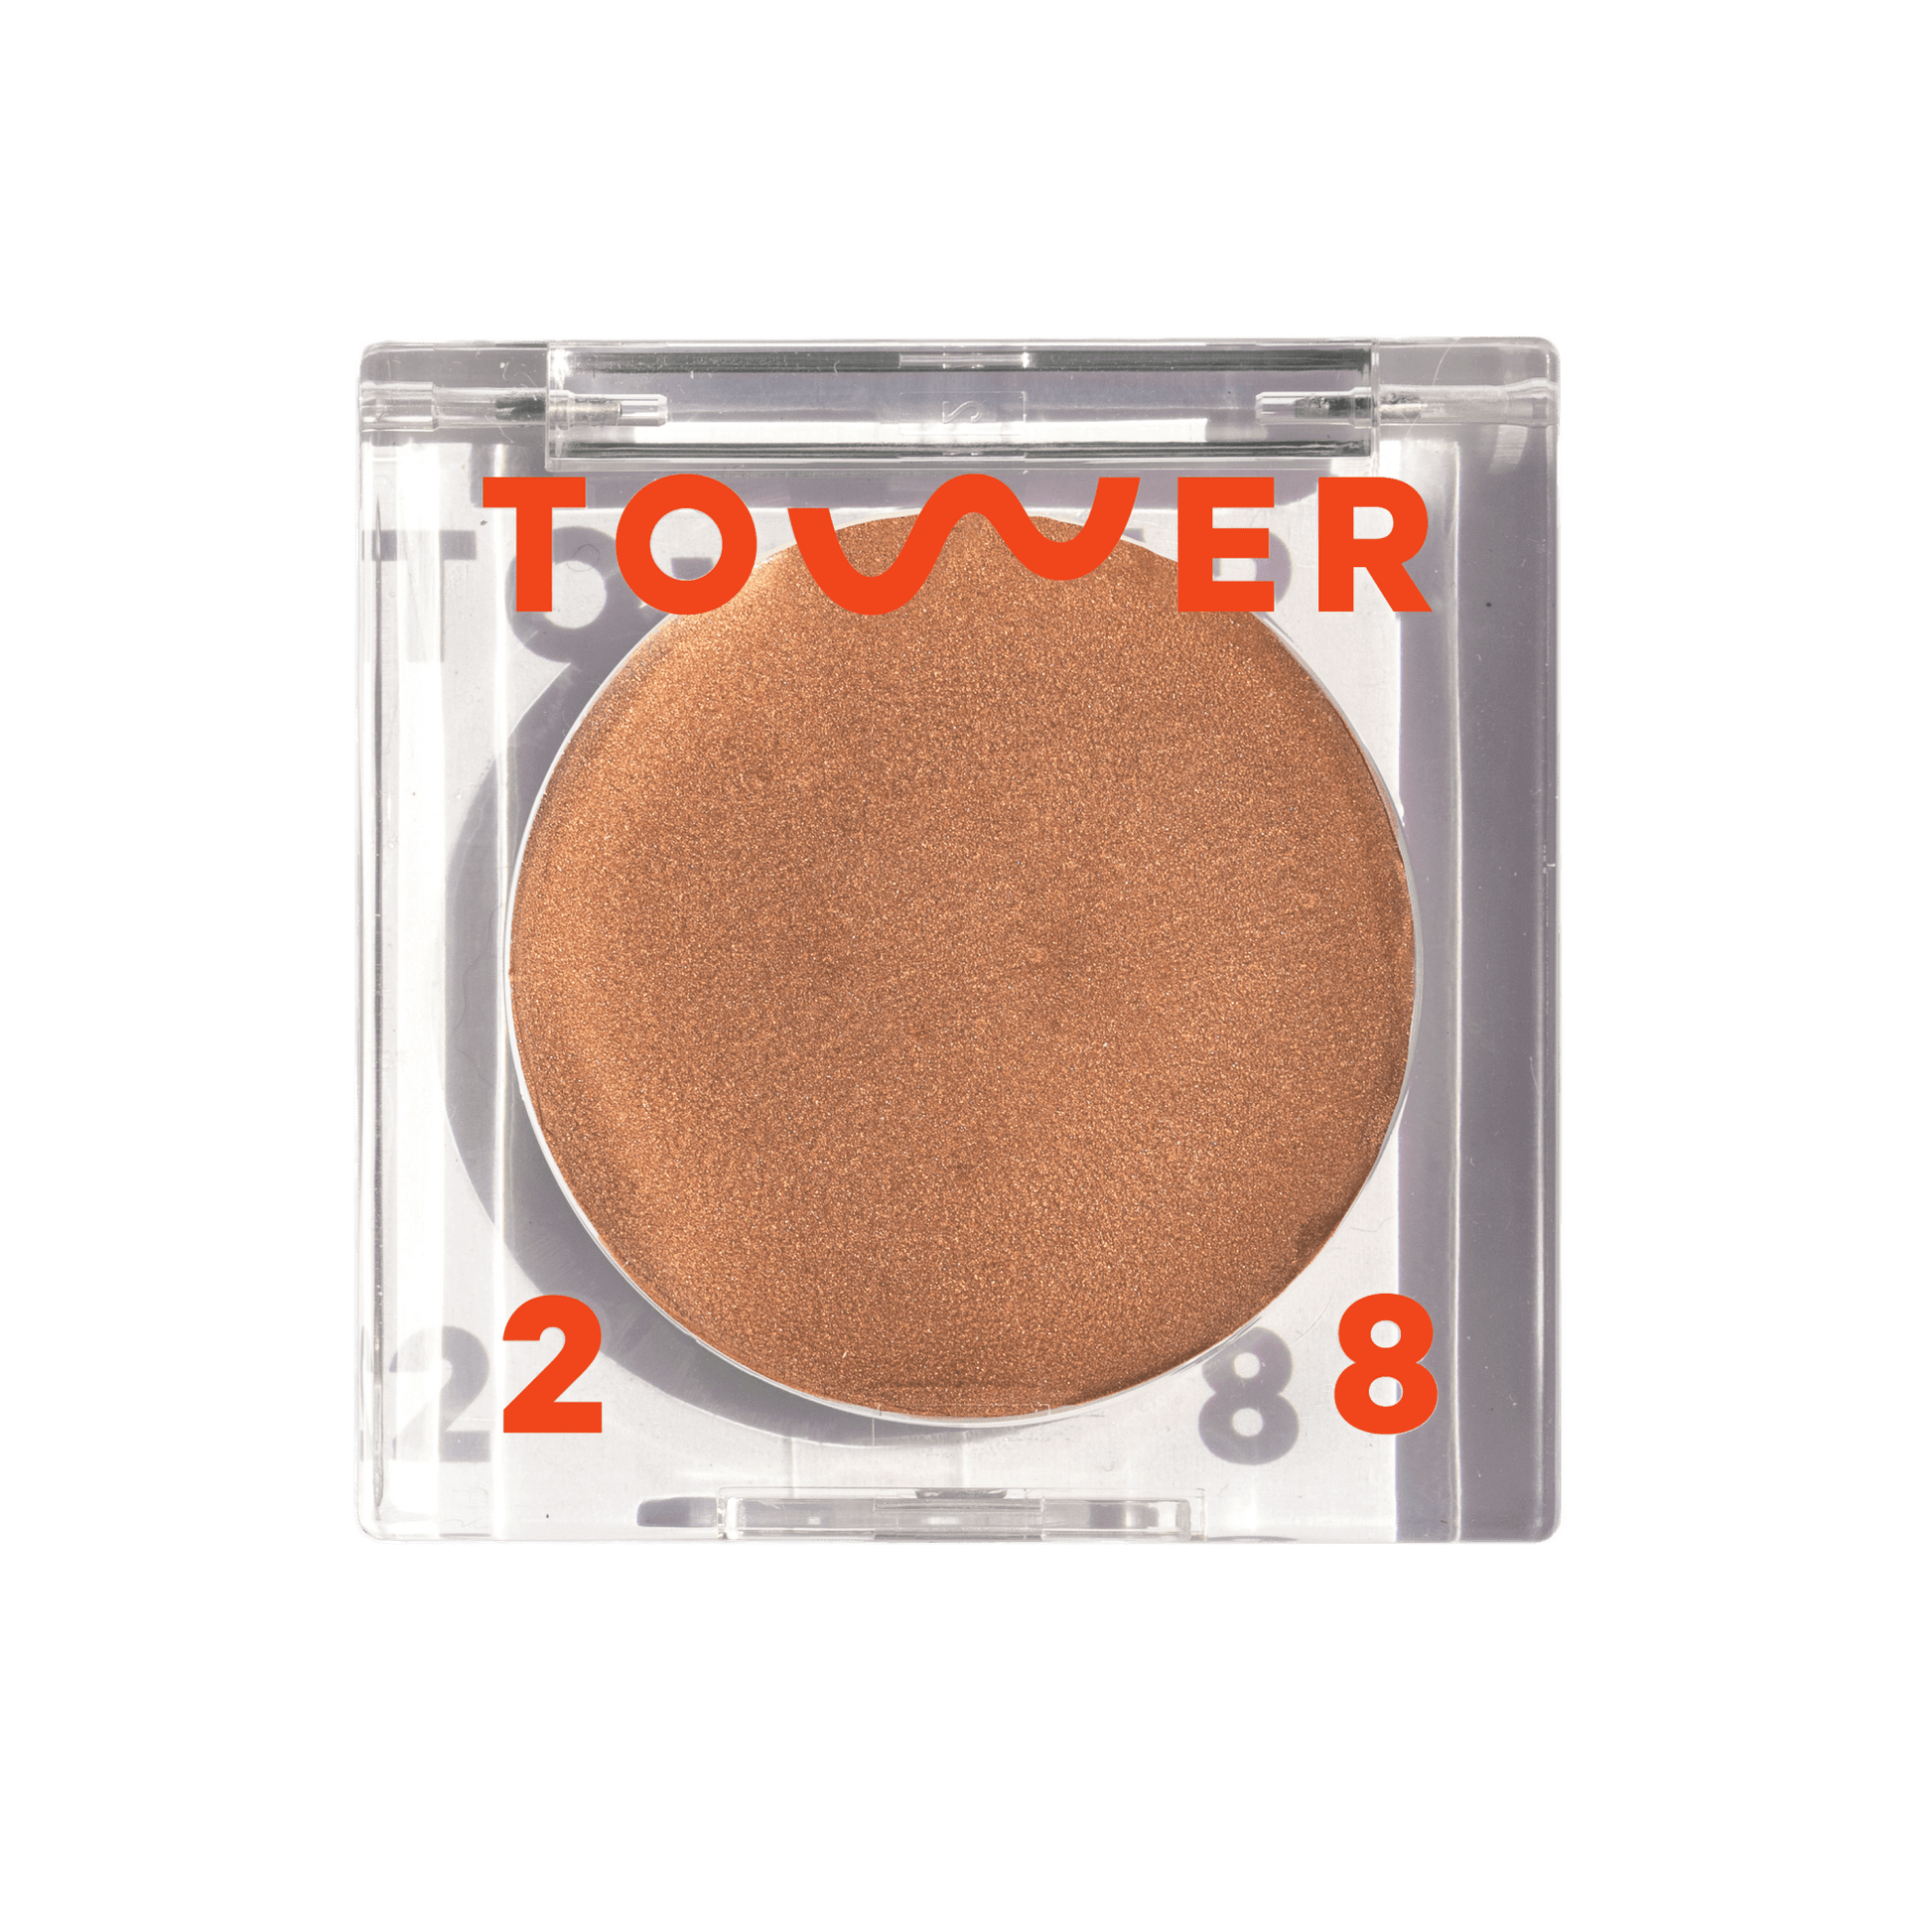 12 Best Bronzers in 2022, According to Makeup Artists, Models, and Beauty  Insiders